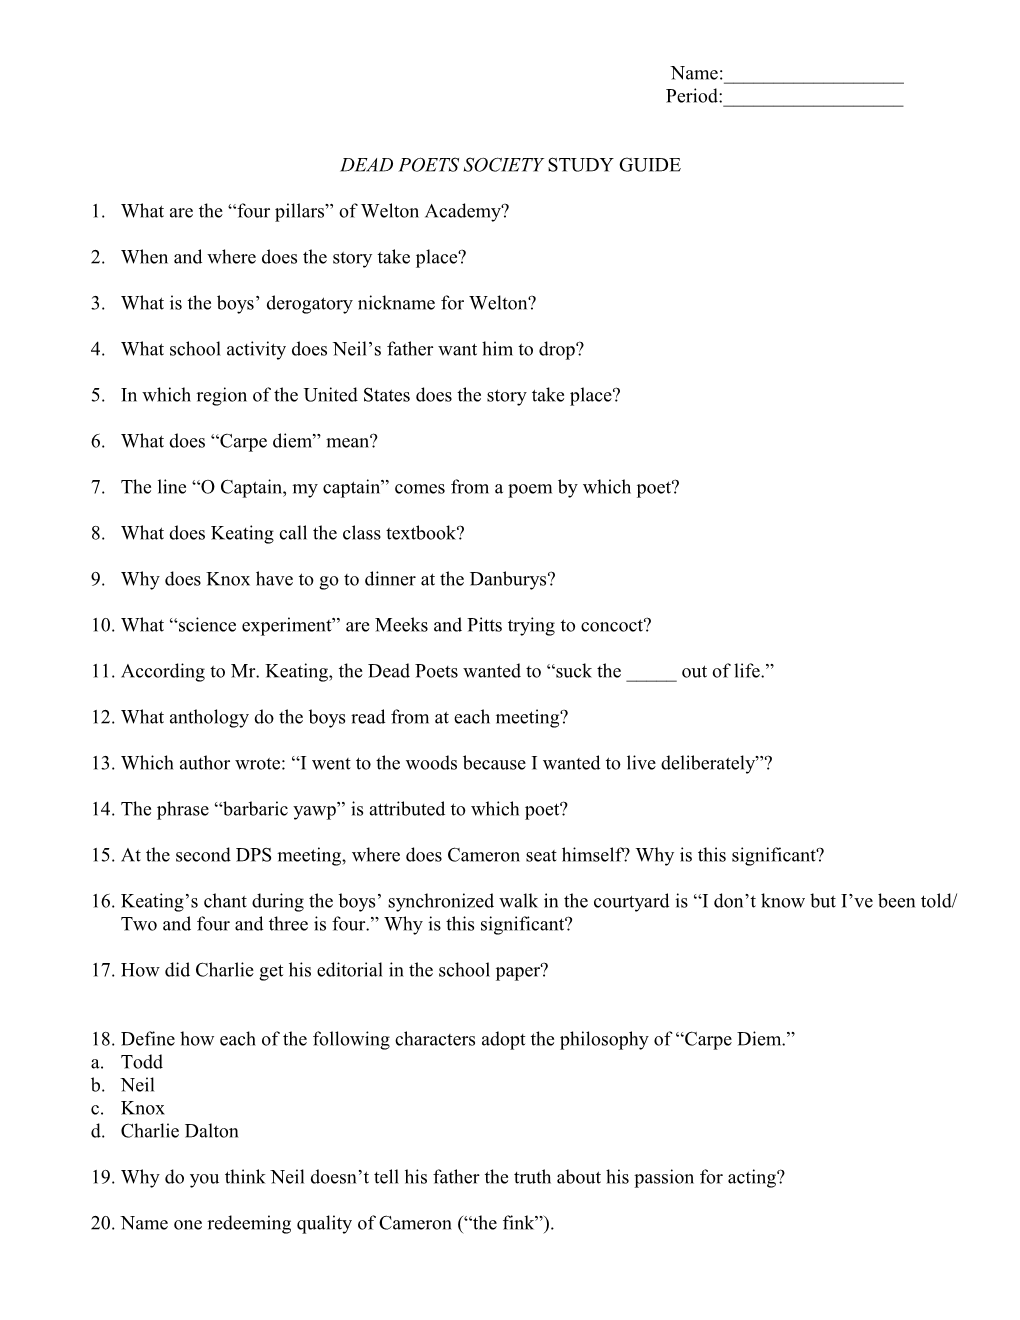 Dead Poets Society Study Guide